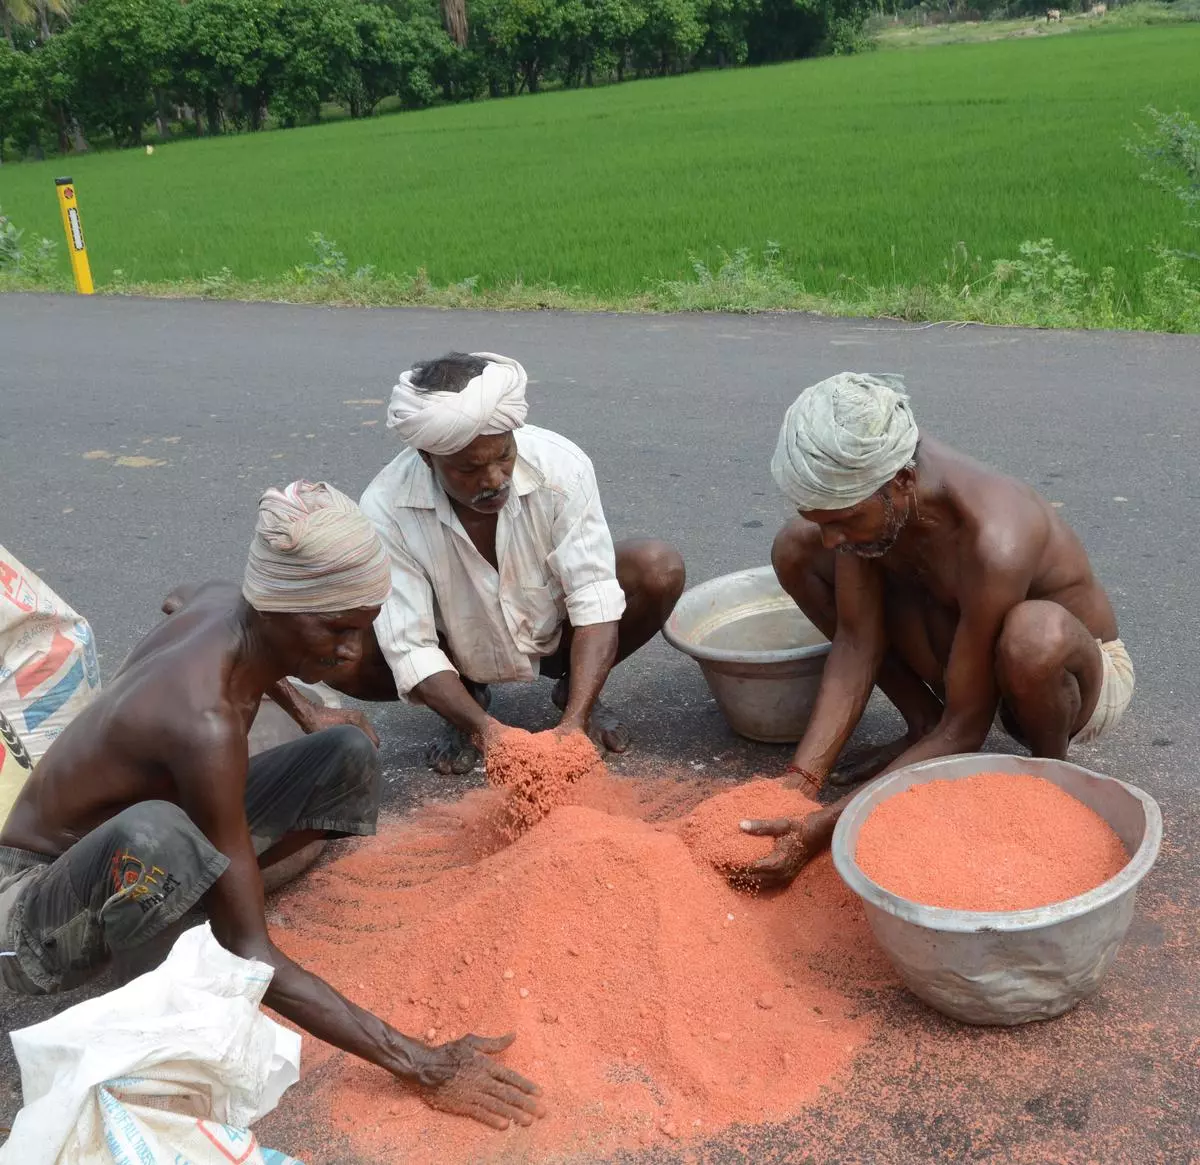 Retail prices of potash are the highest among the all fertilisers in the recent subsidy announced by the Centre for the kharif season